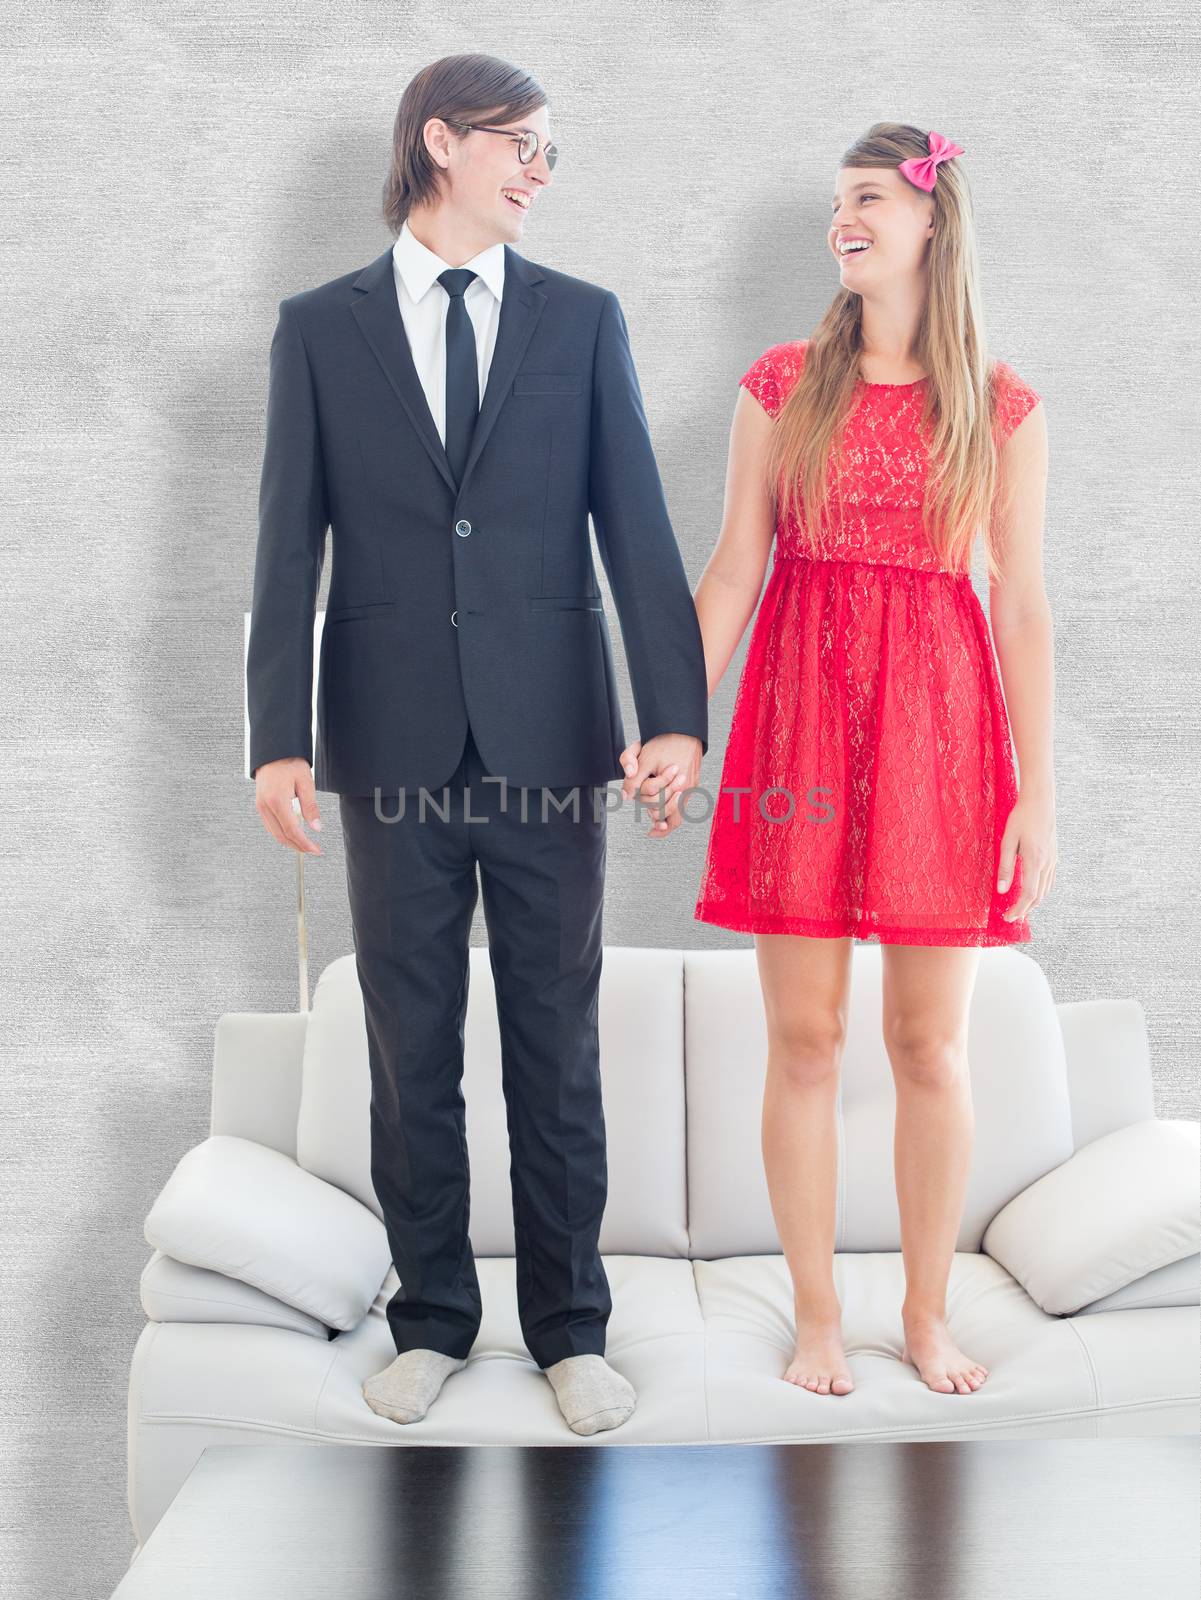 Geeky couple standing hand in hand on the couch against white background